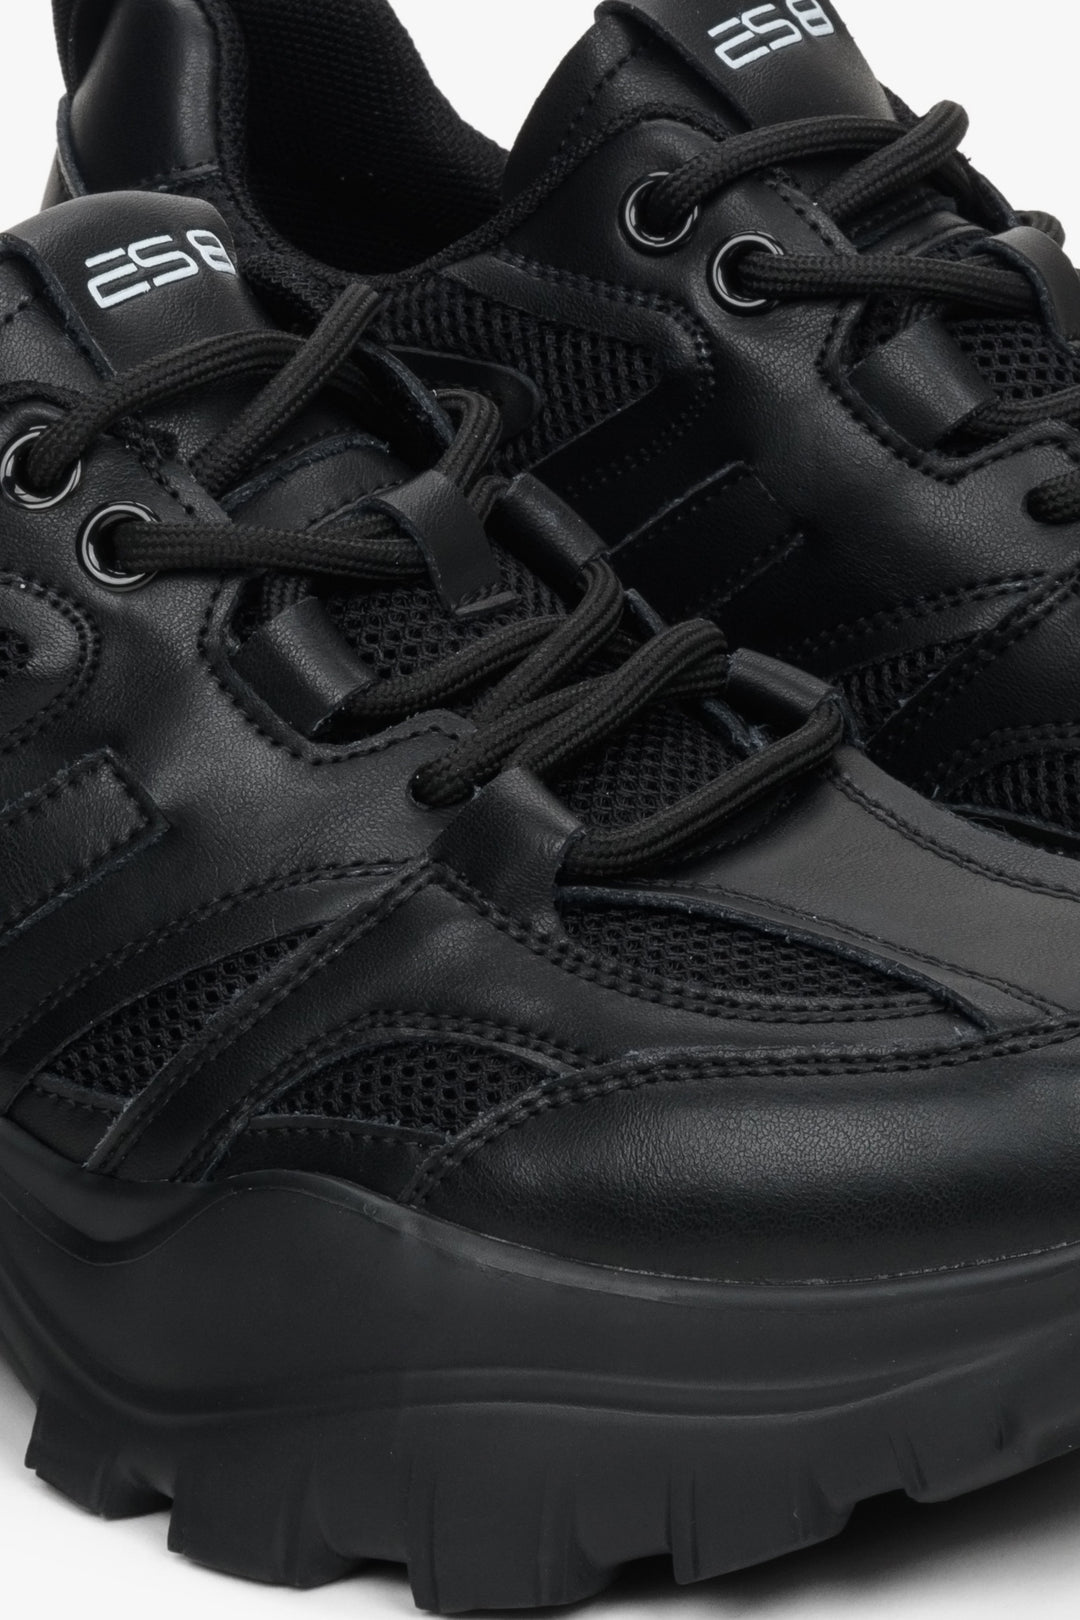 Women's black sneakers made of genuine leather - close-up of the stitching system and shoe details.